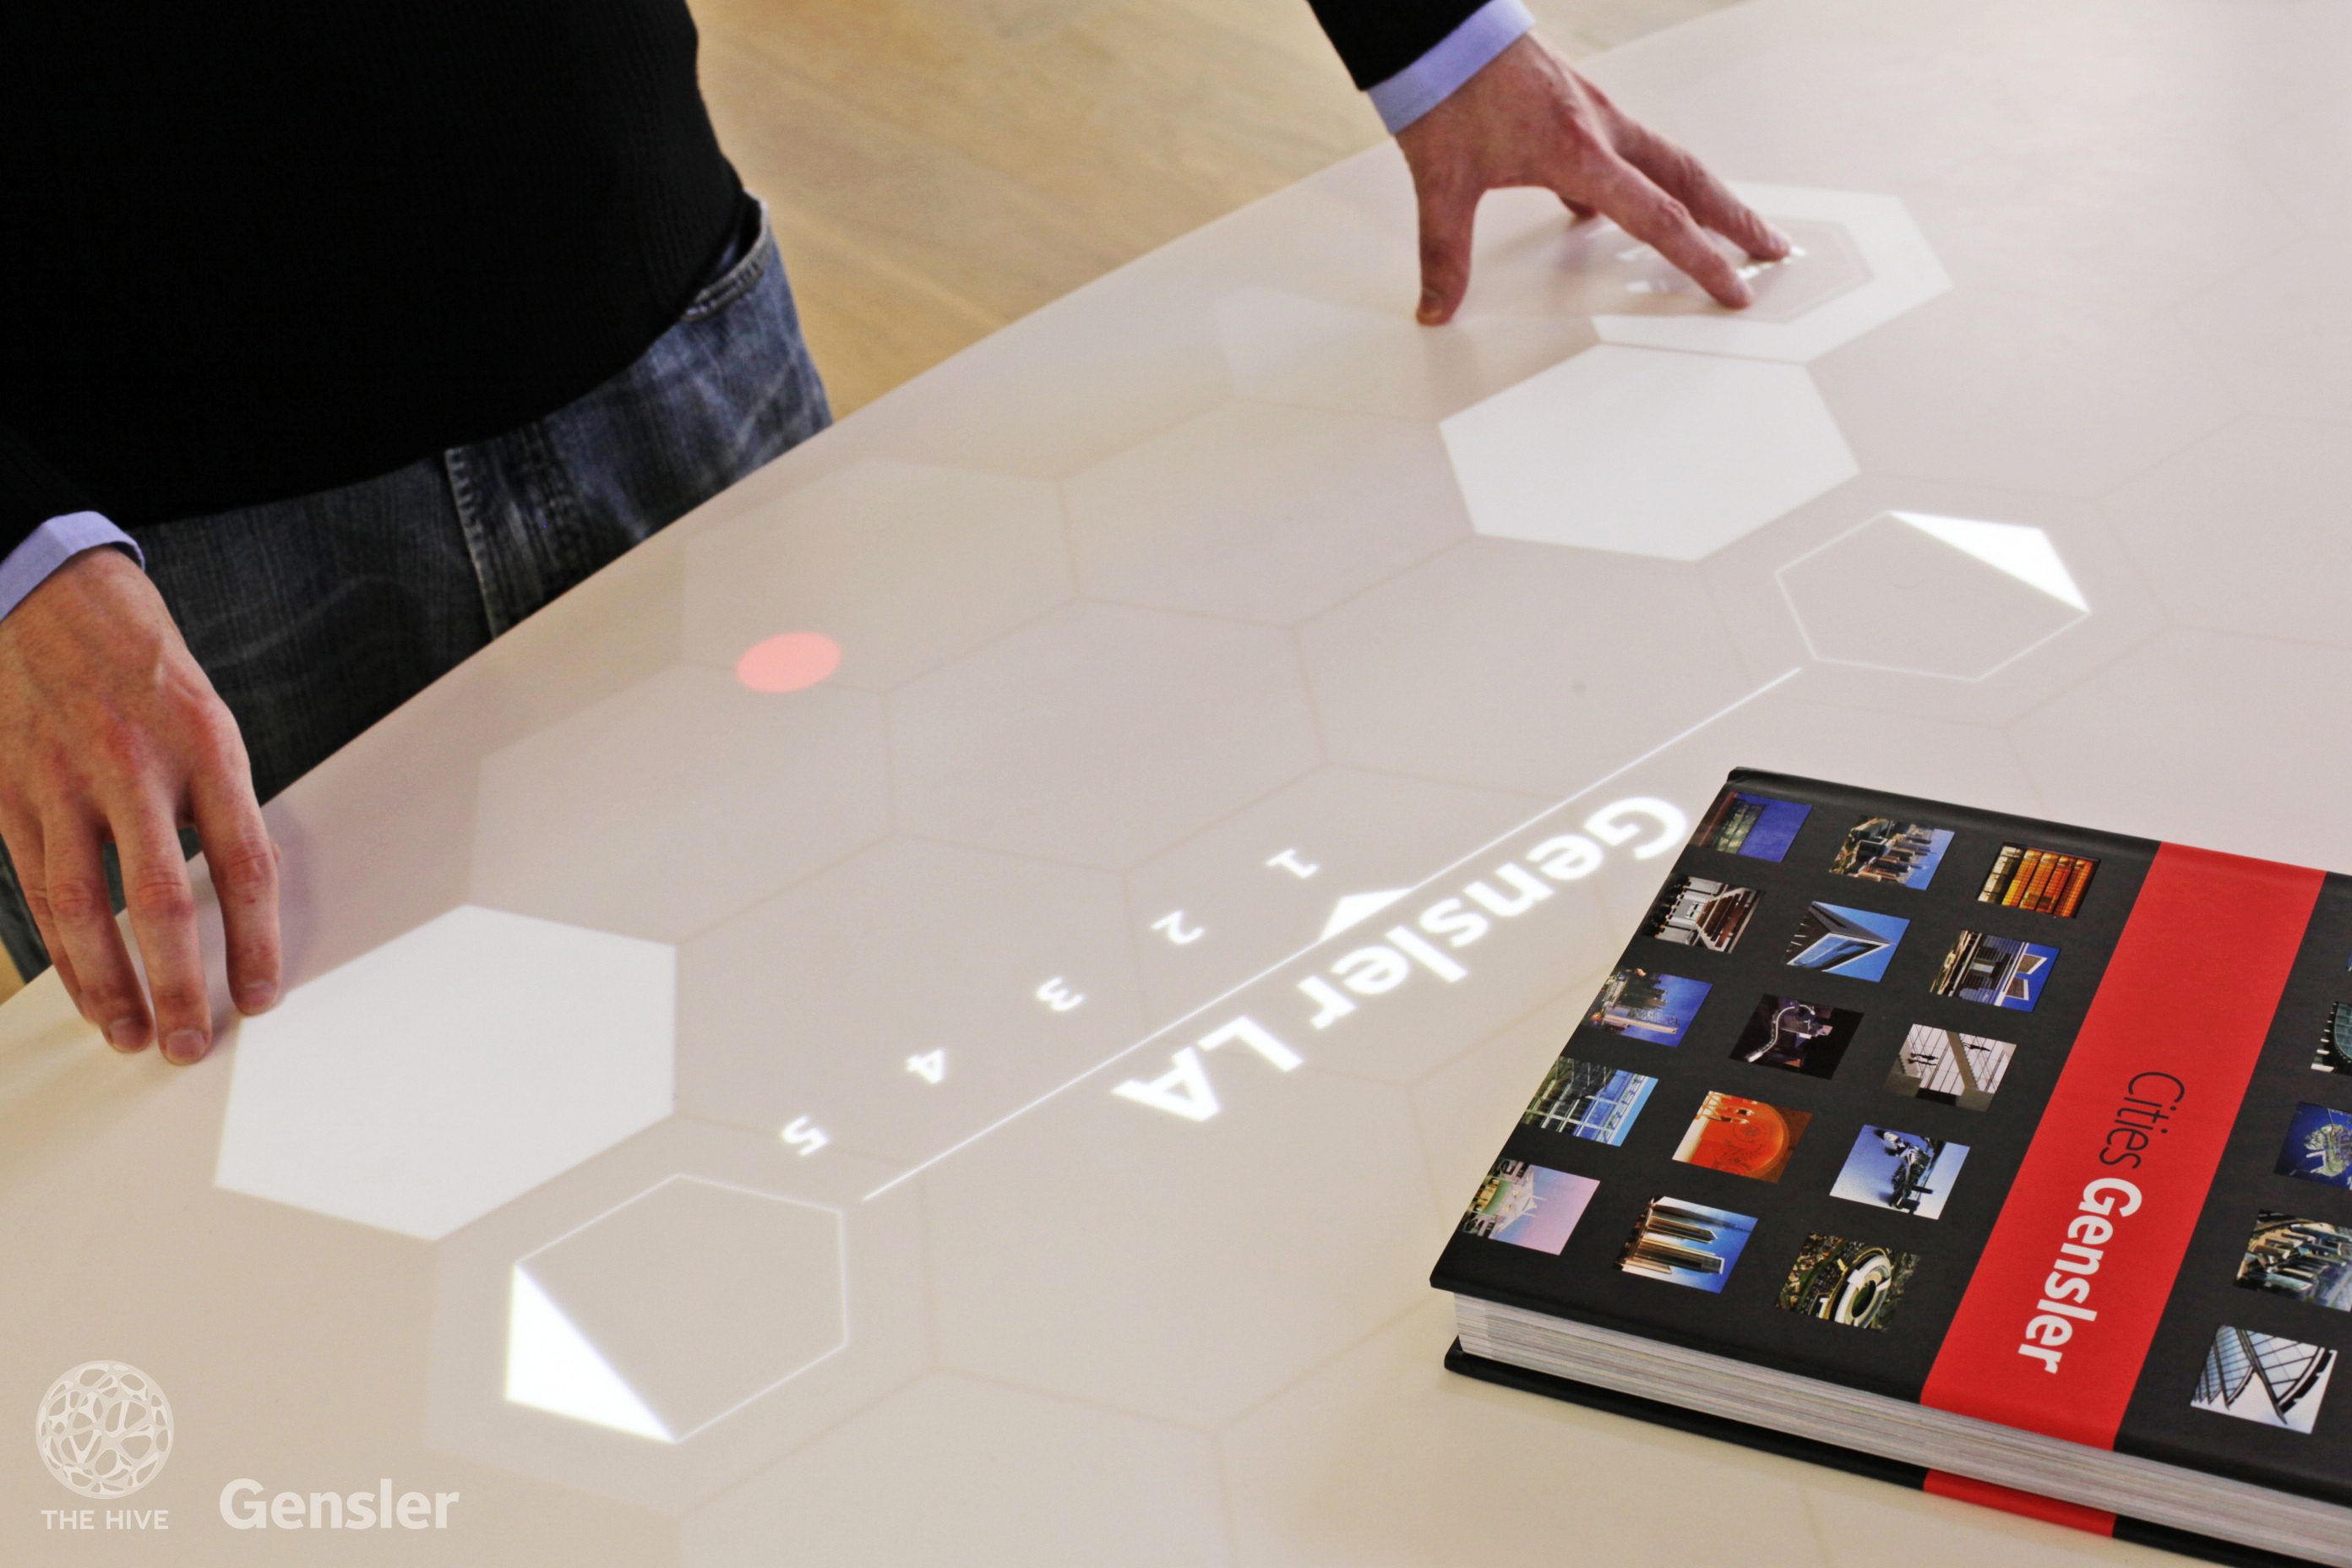 The Hive / Gensler Multi Surface Experience, Book and Interface